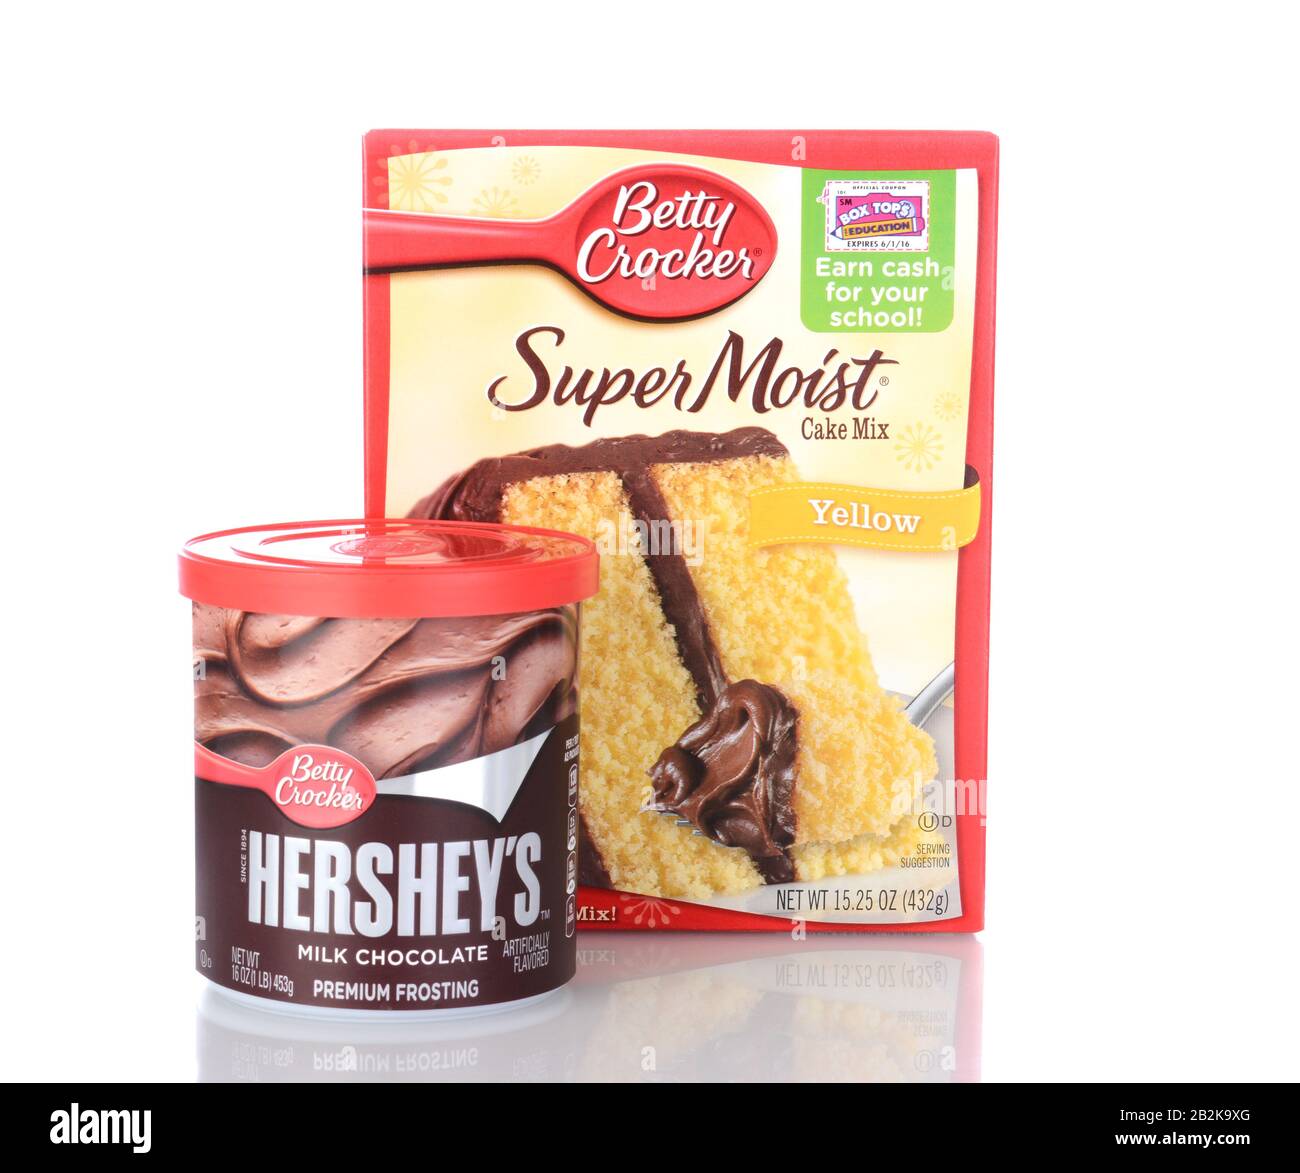 IRVINE, CA - January 05, 2014: Betty Crocker Super Moist Cake Mix and Frosting. One box of Yellow Cake Mix and a can of ready to spread Hershey's Milk Stock Photo